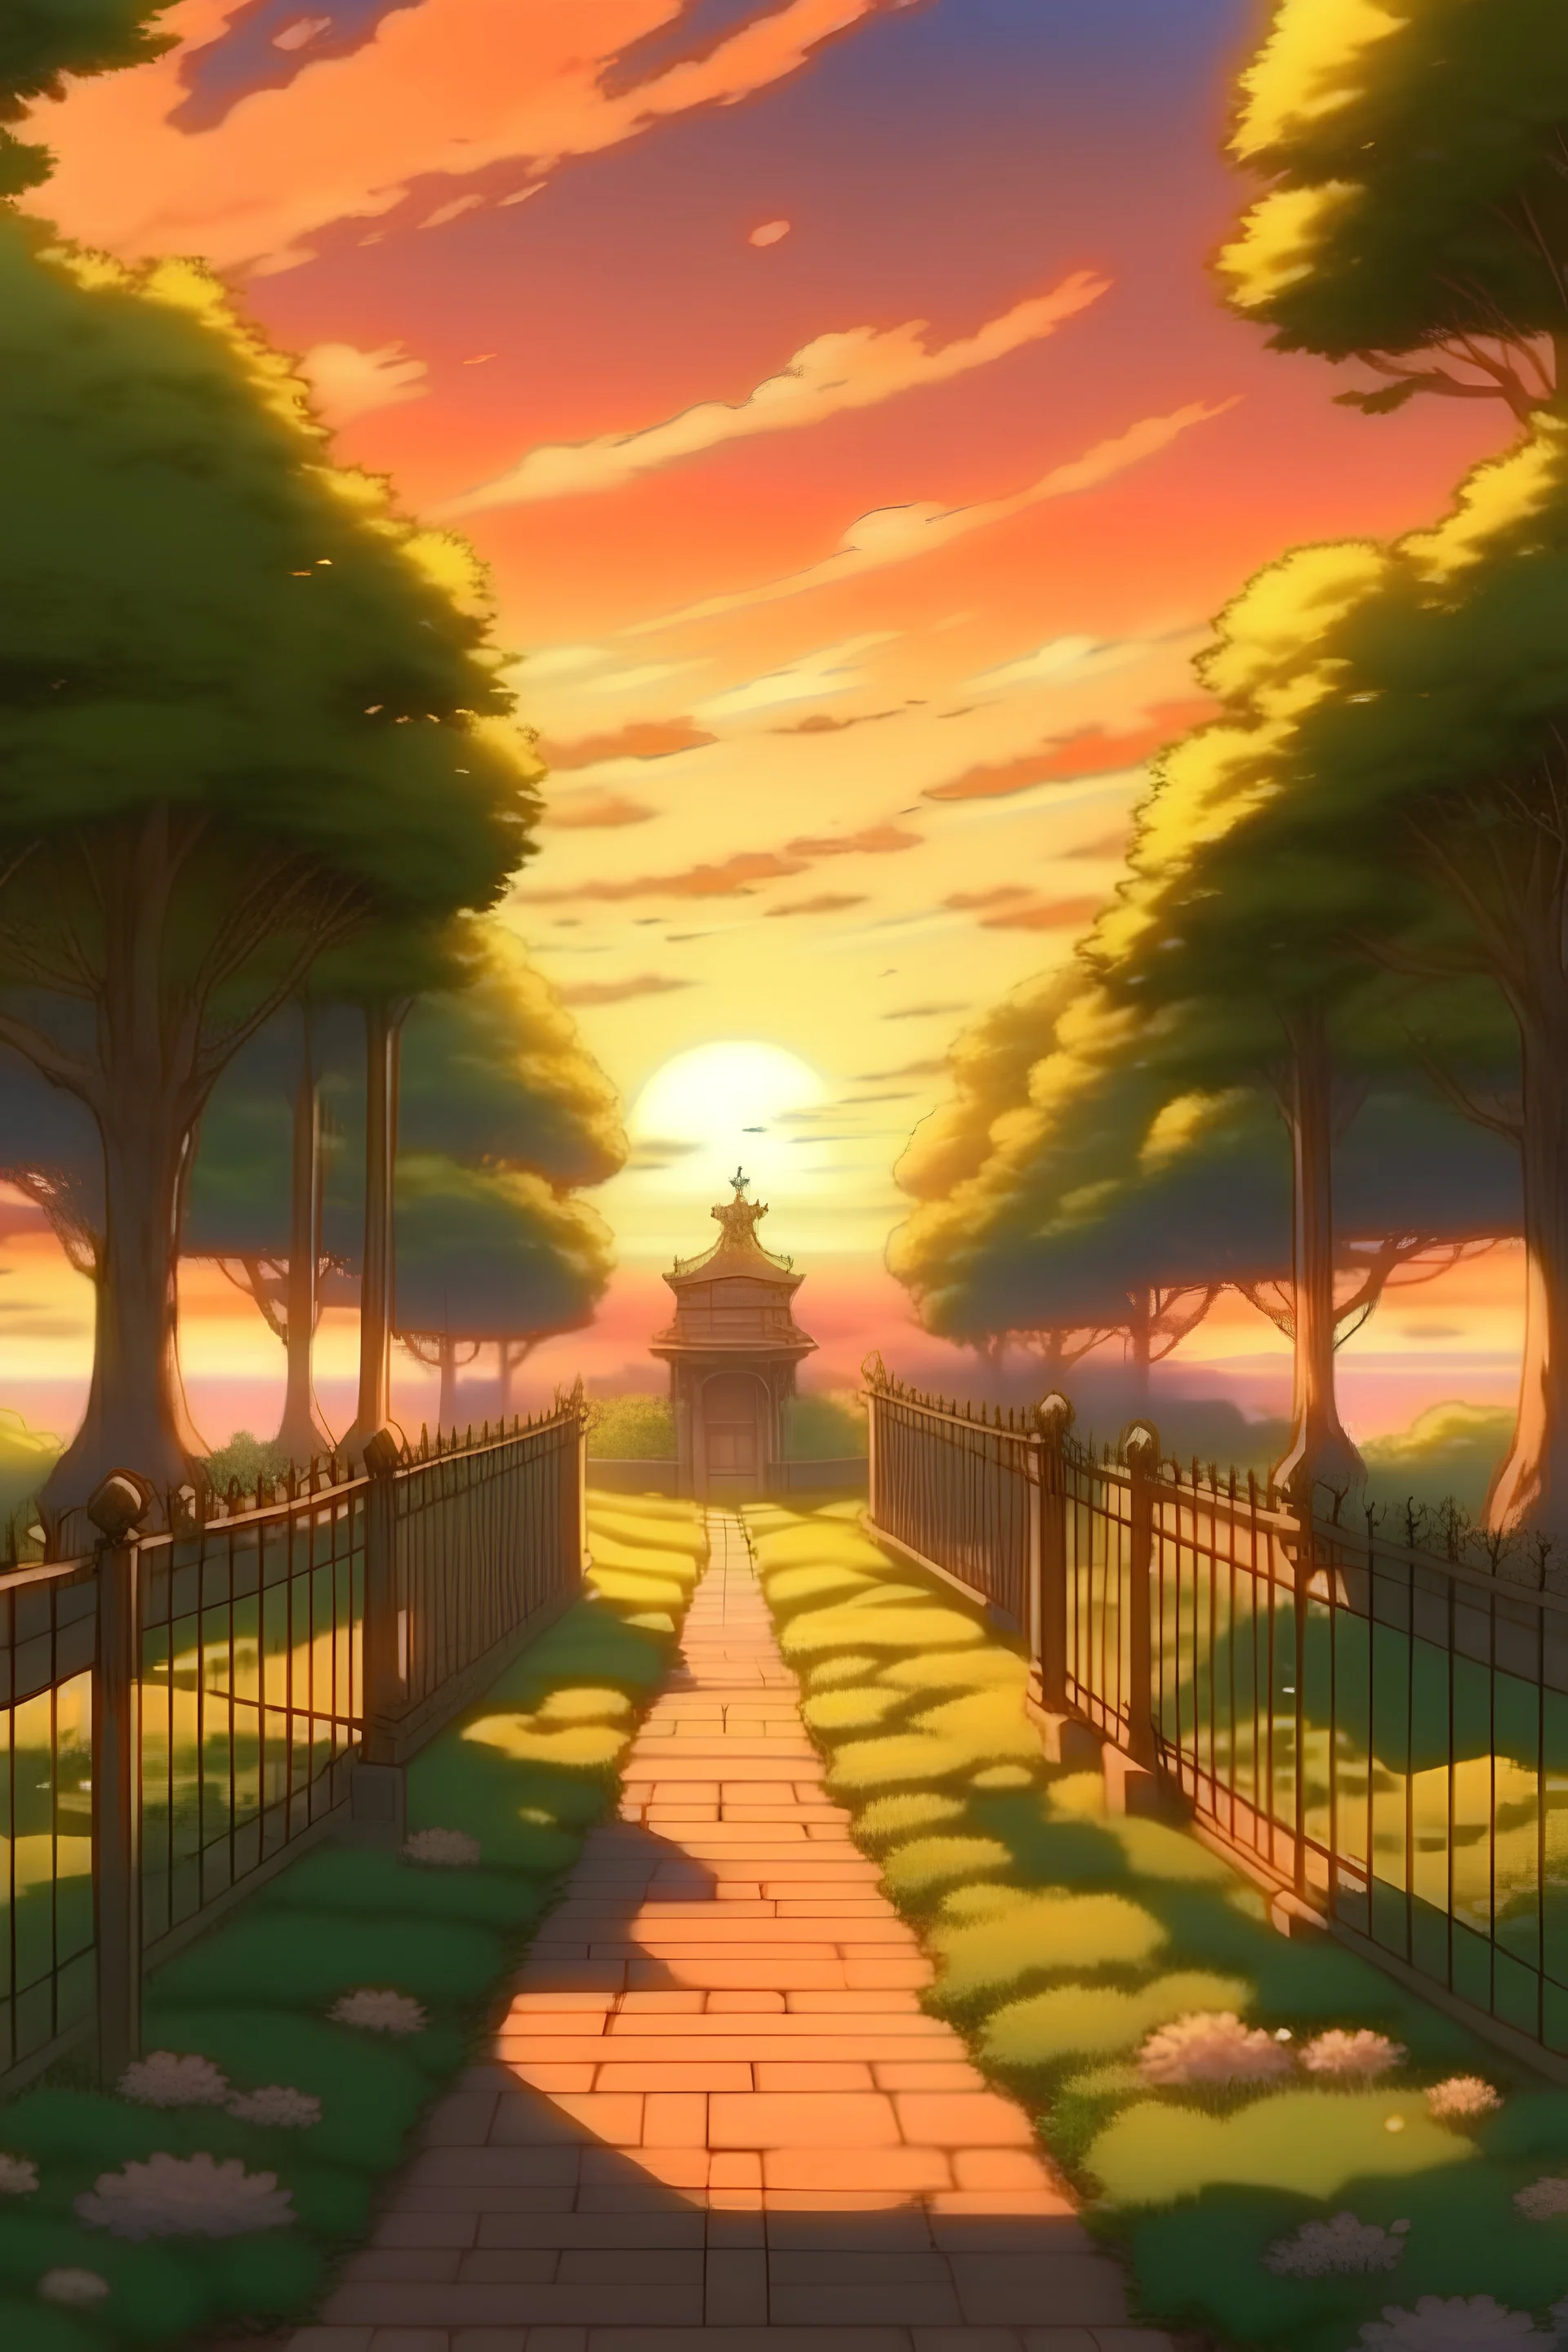 sunset anime royal garden with path without fence to forrest view towards forrest